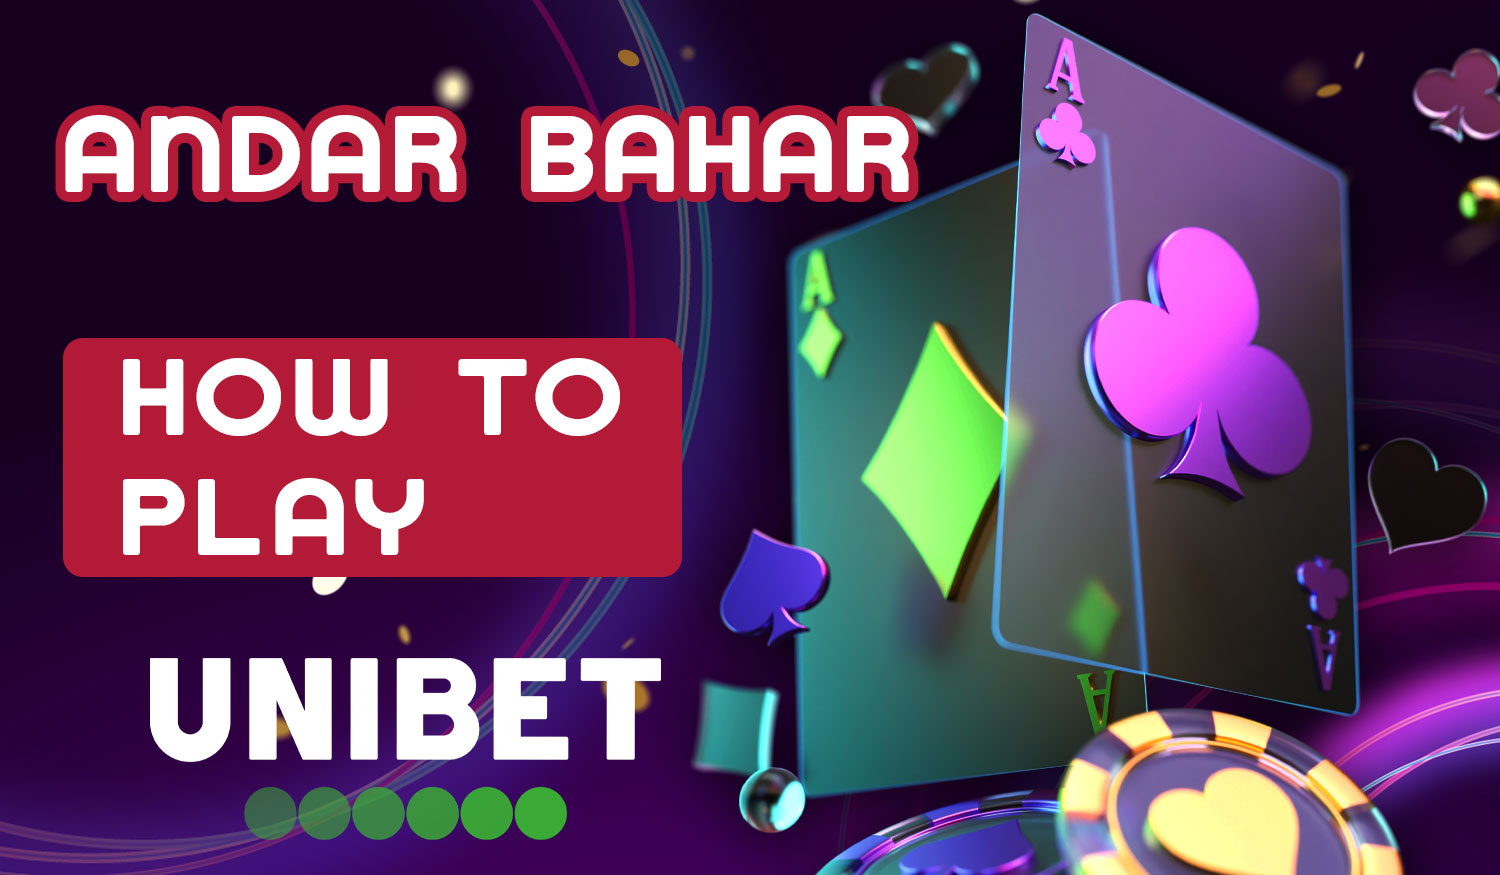 A detailed guide on how to play Andar Bahar for players from India on the Unibet Casino platform